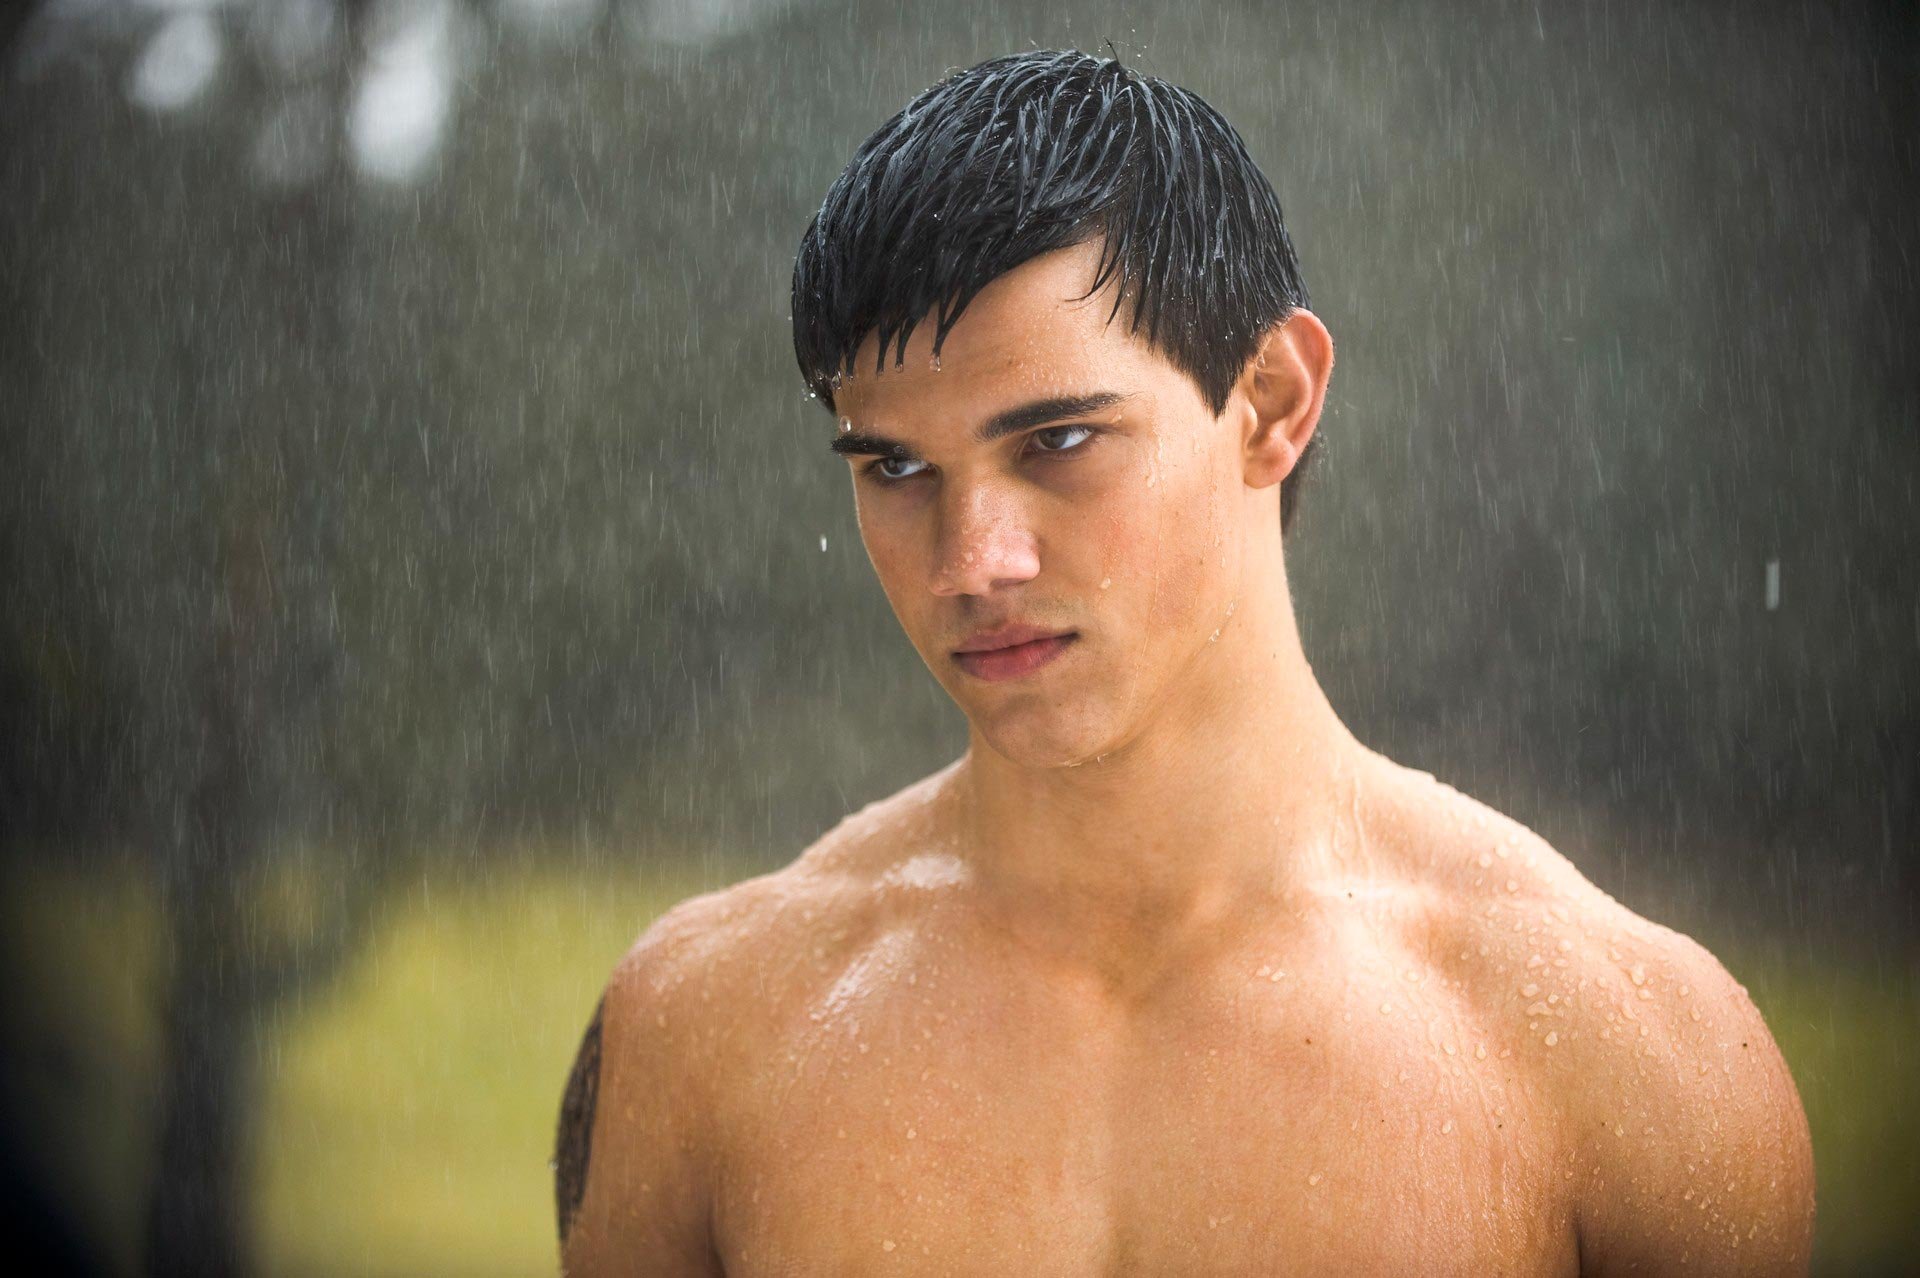 Shirtless Taylor Lautner HD Wallpaper Background For